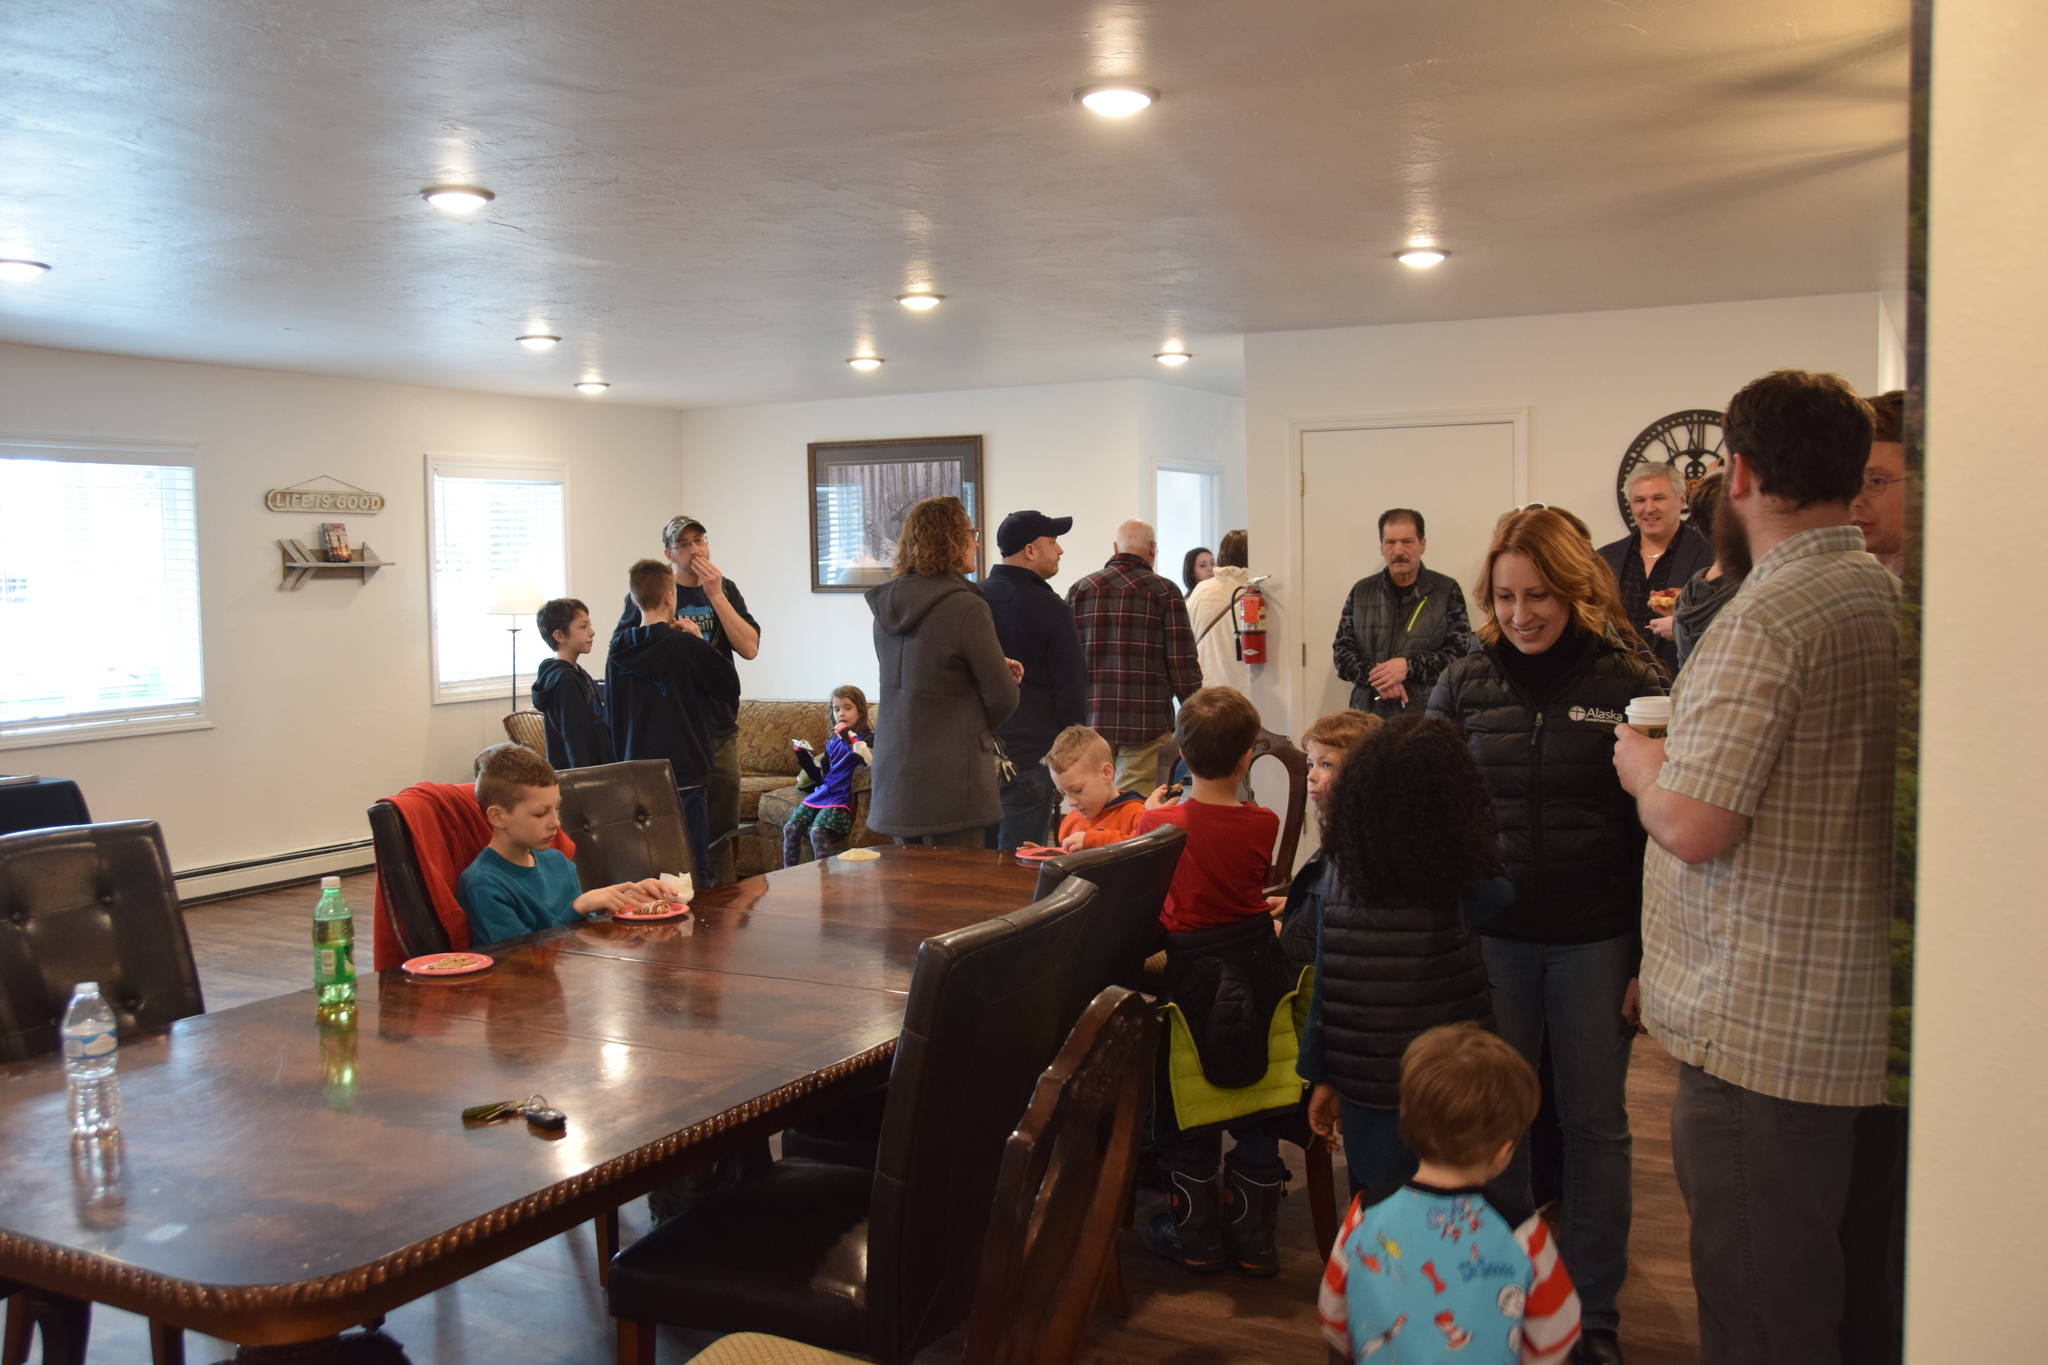 Community members show their support for the opening of Freedom House’s men’s residence in Soldotna, Alaska, on March 24, 2019. (Photo by Brian Mazurek/Peninsula Clarion)